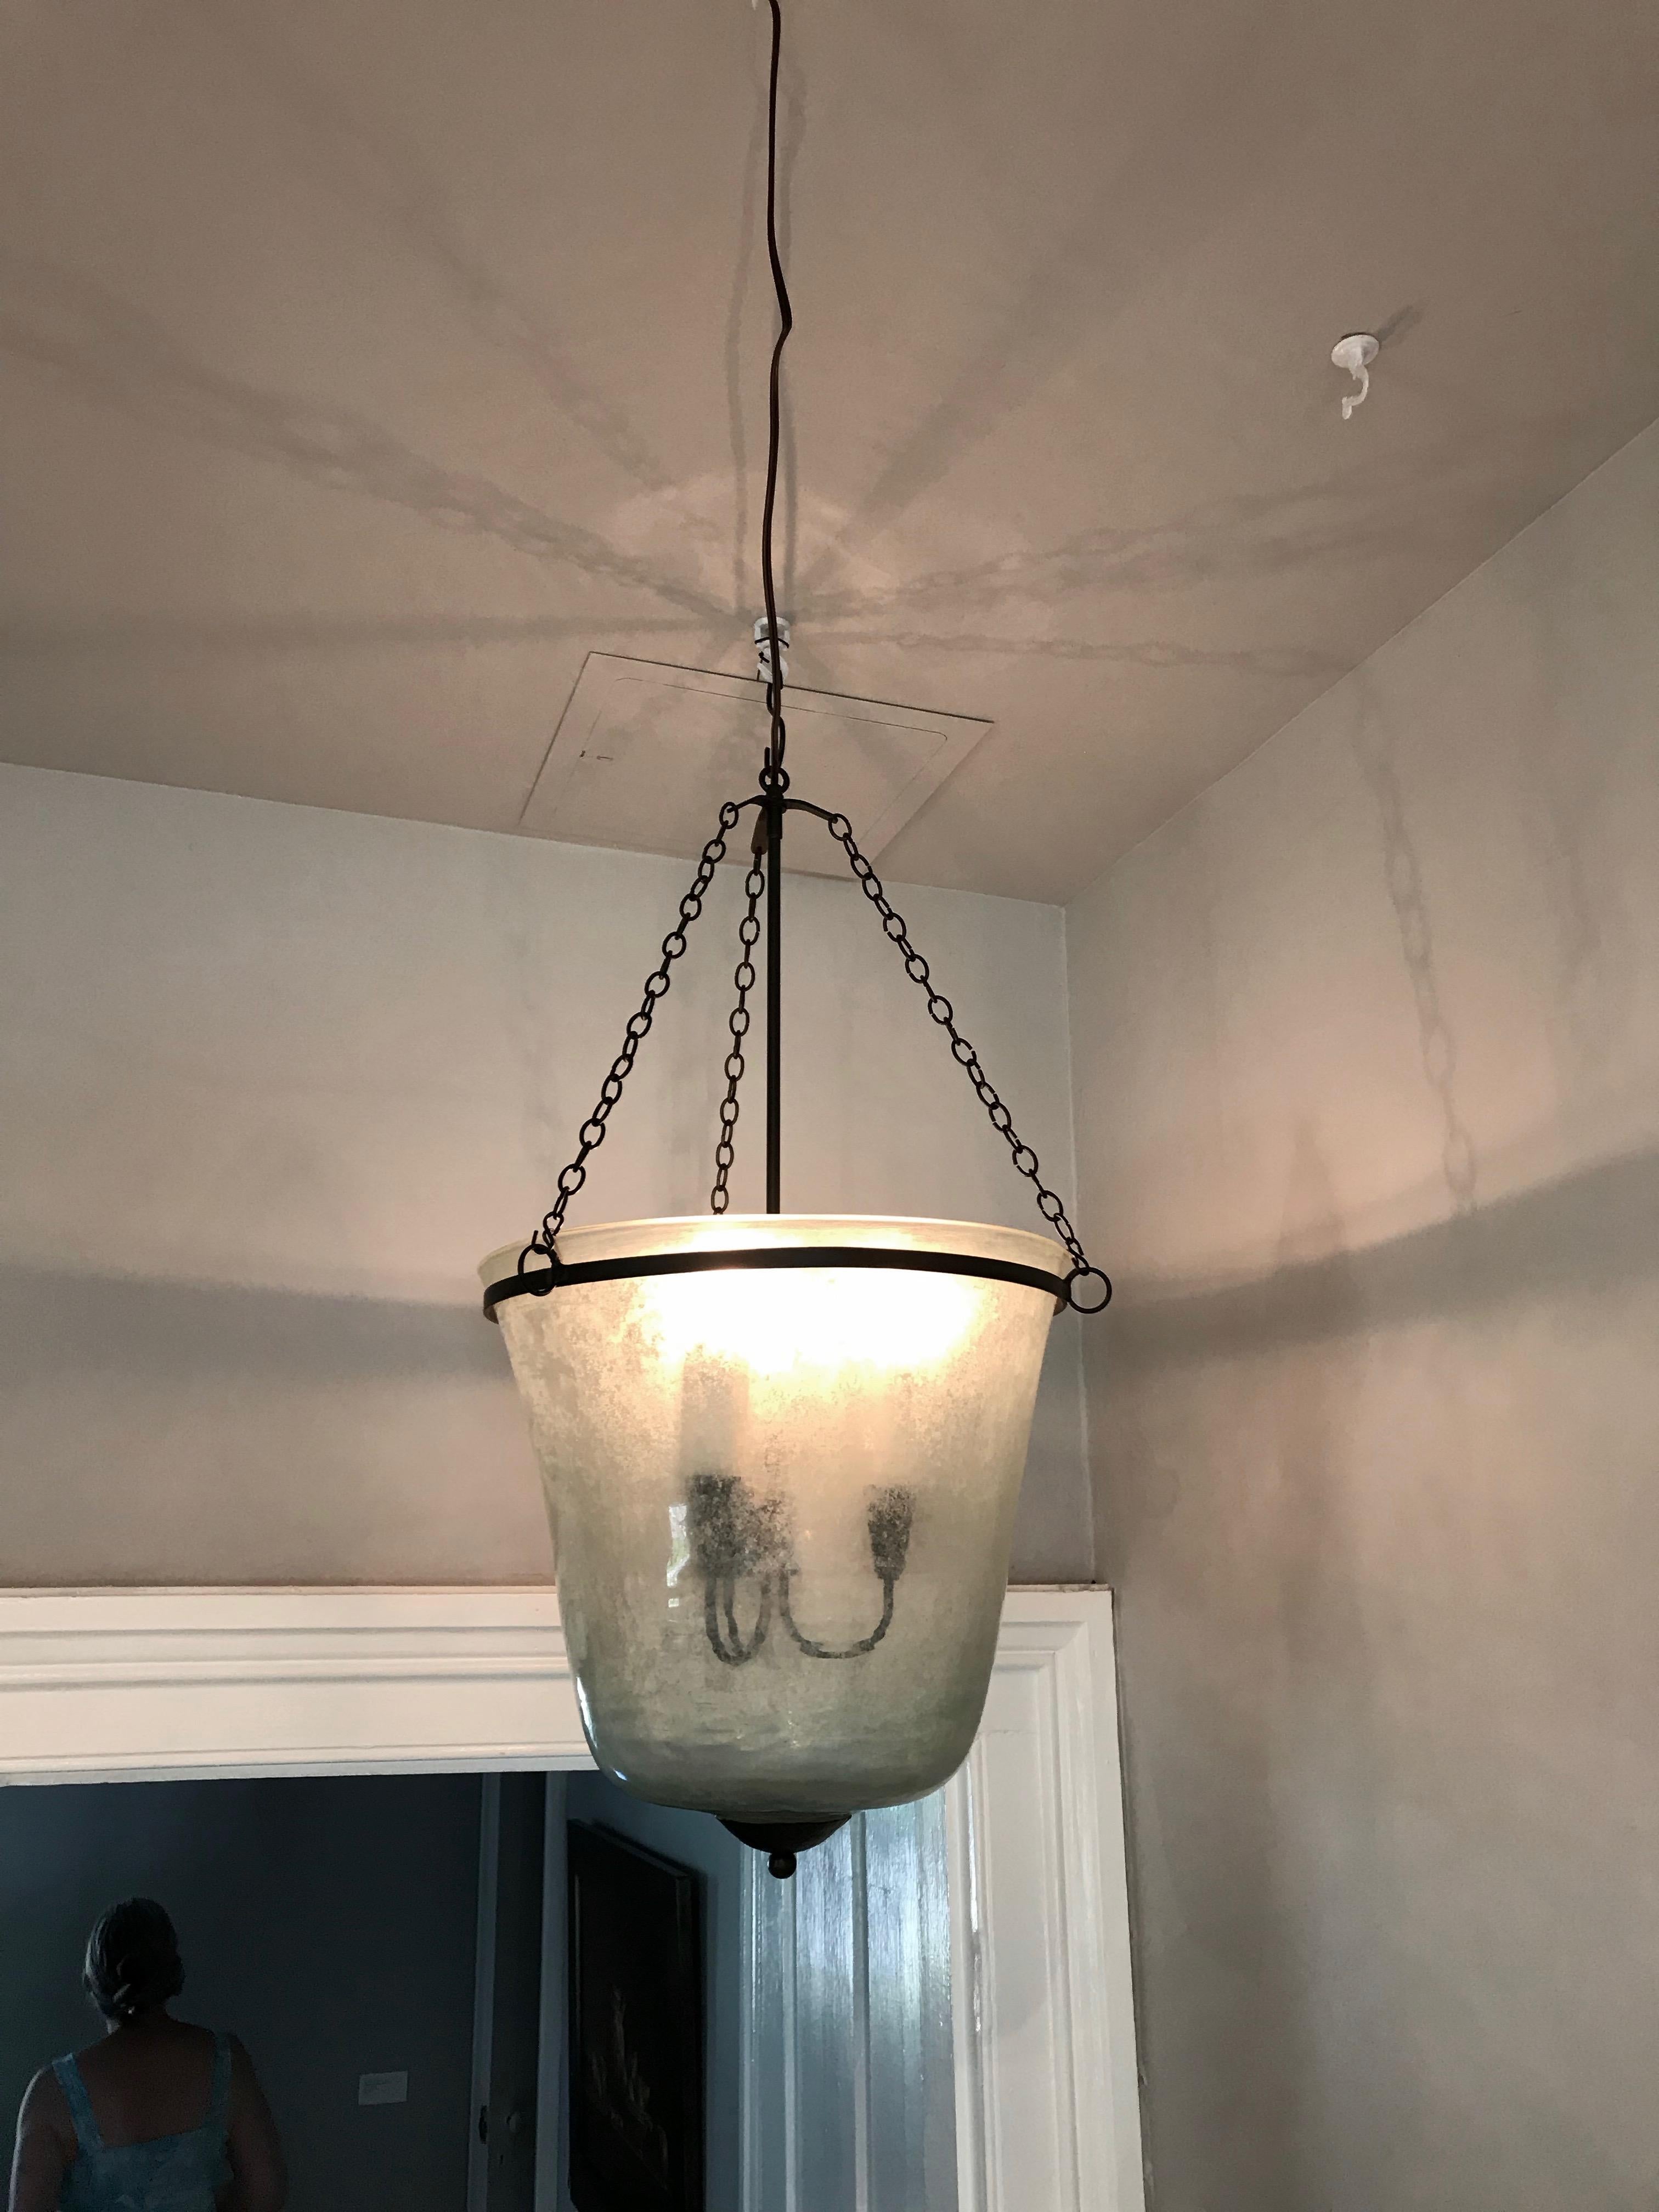 We have always had a thing for hand blown French garden cloches that come in two configurations: bell form and melon form. This one is a bell cloche (a little taller and more narrow than a melon cloche) and it has been converted into a hanging light